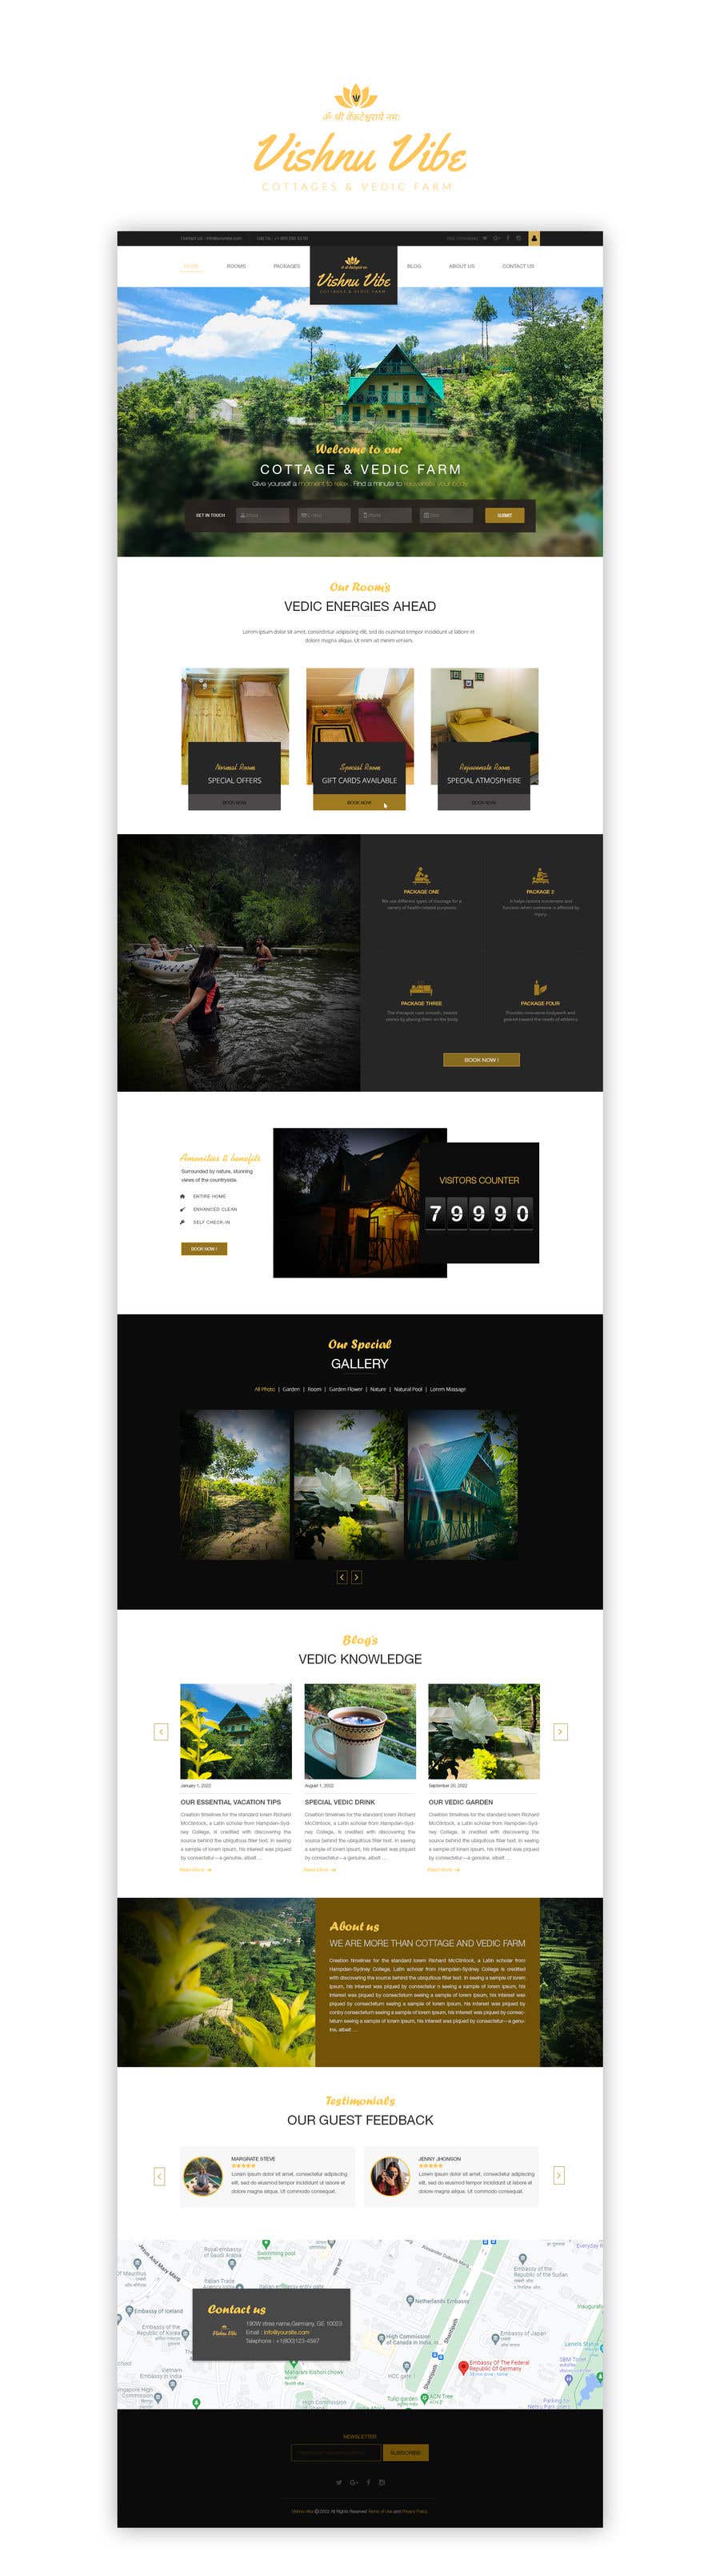 Bài tham dự cuộc thi #26 cho                                                 Website design 5 pages + short Video + basic graphic optimization for a luxury Homestay - Resort website
                                            